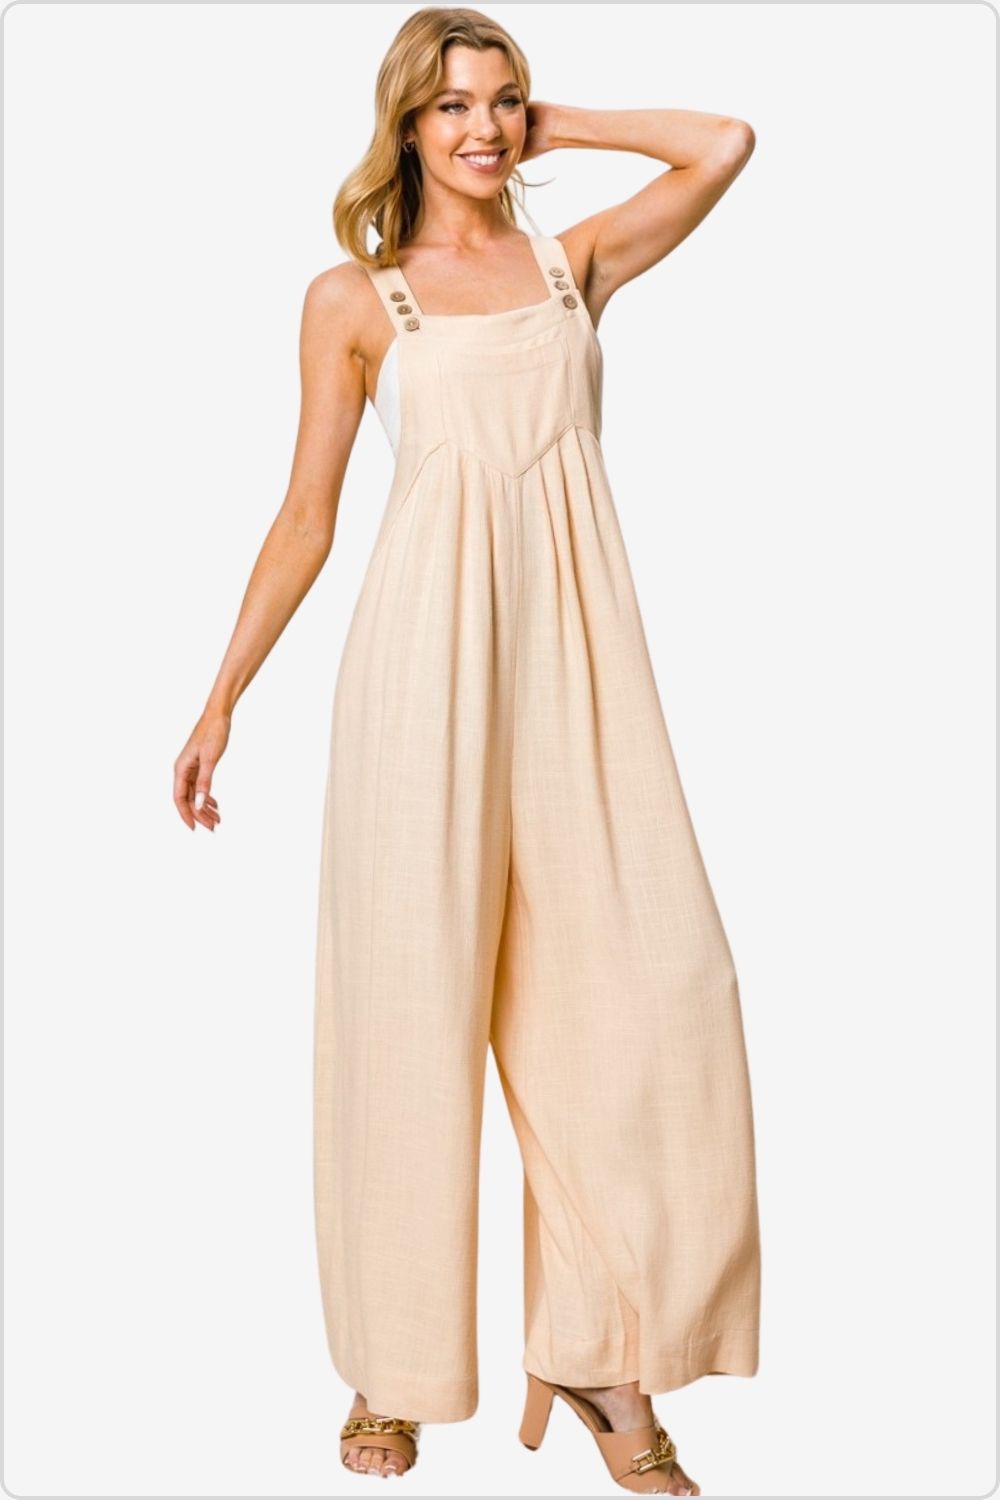 Confident woman posing in a beige linen jumpsuit with button details, perfect for summer